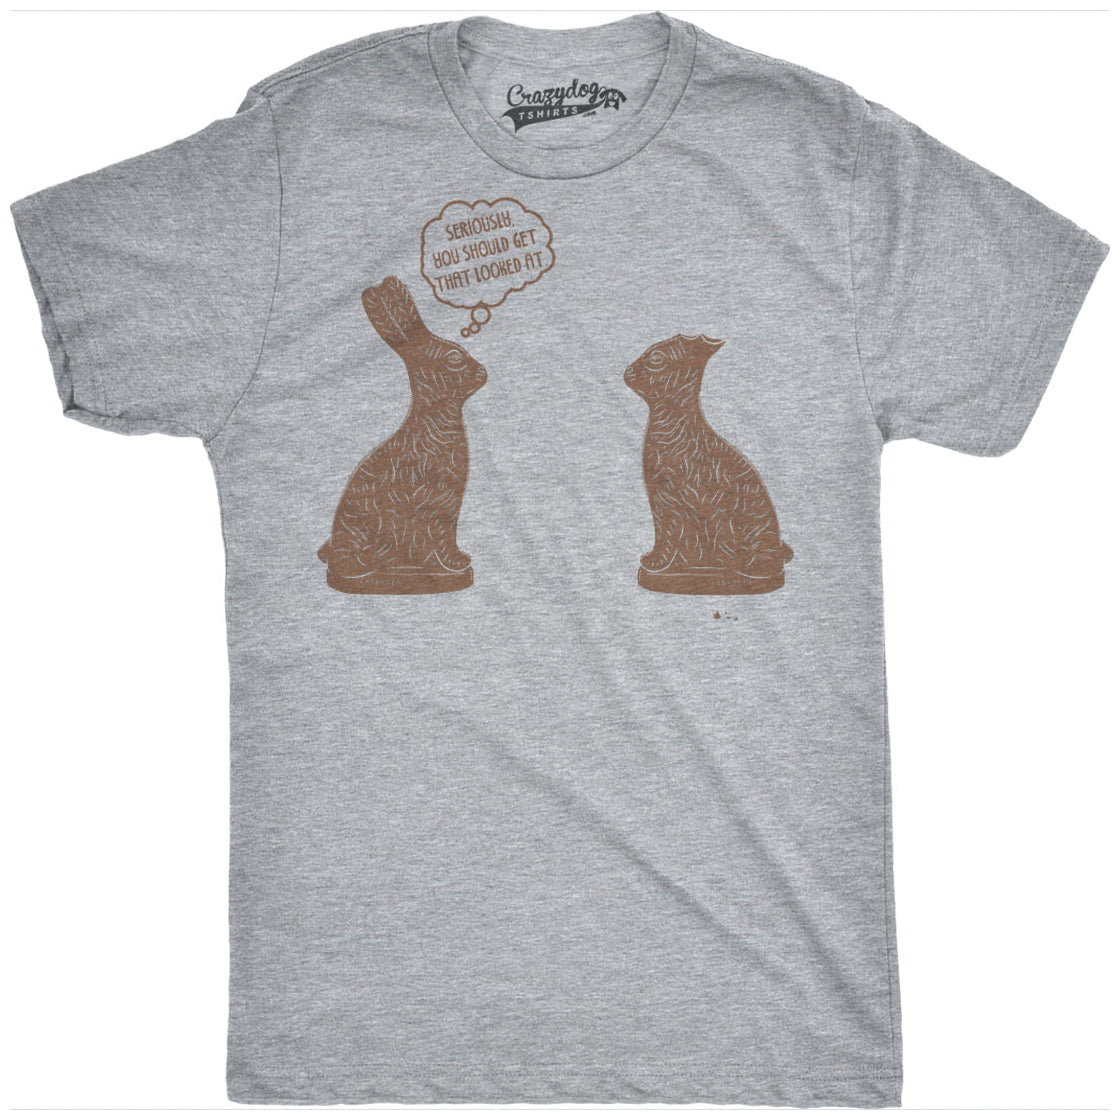 Funny Light Heather Grey You Should Get That Looked At Mens T Shirt Nerdy Easter Tee